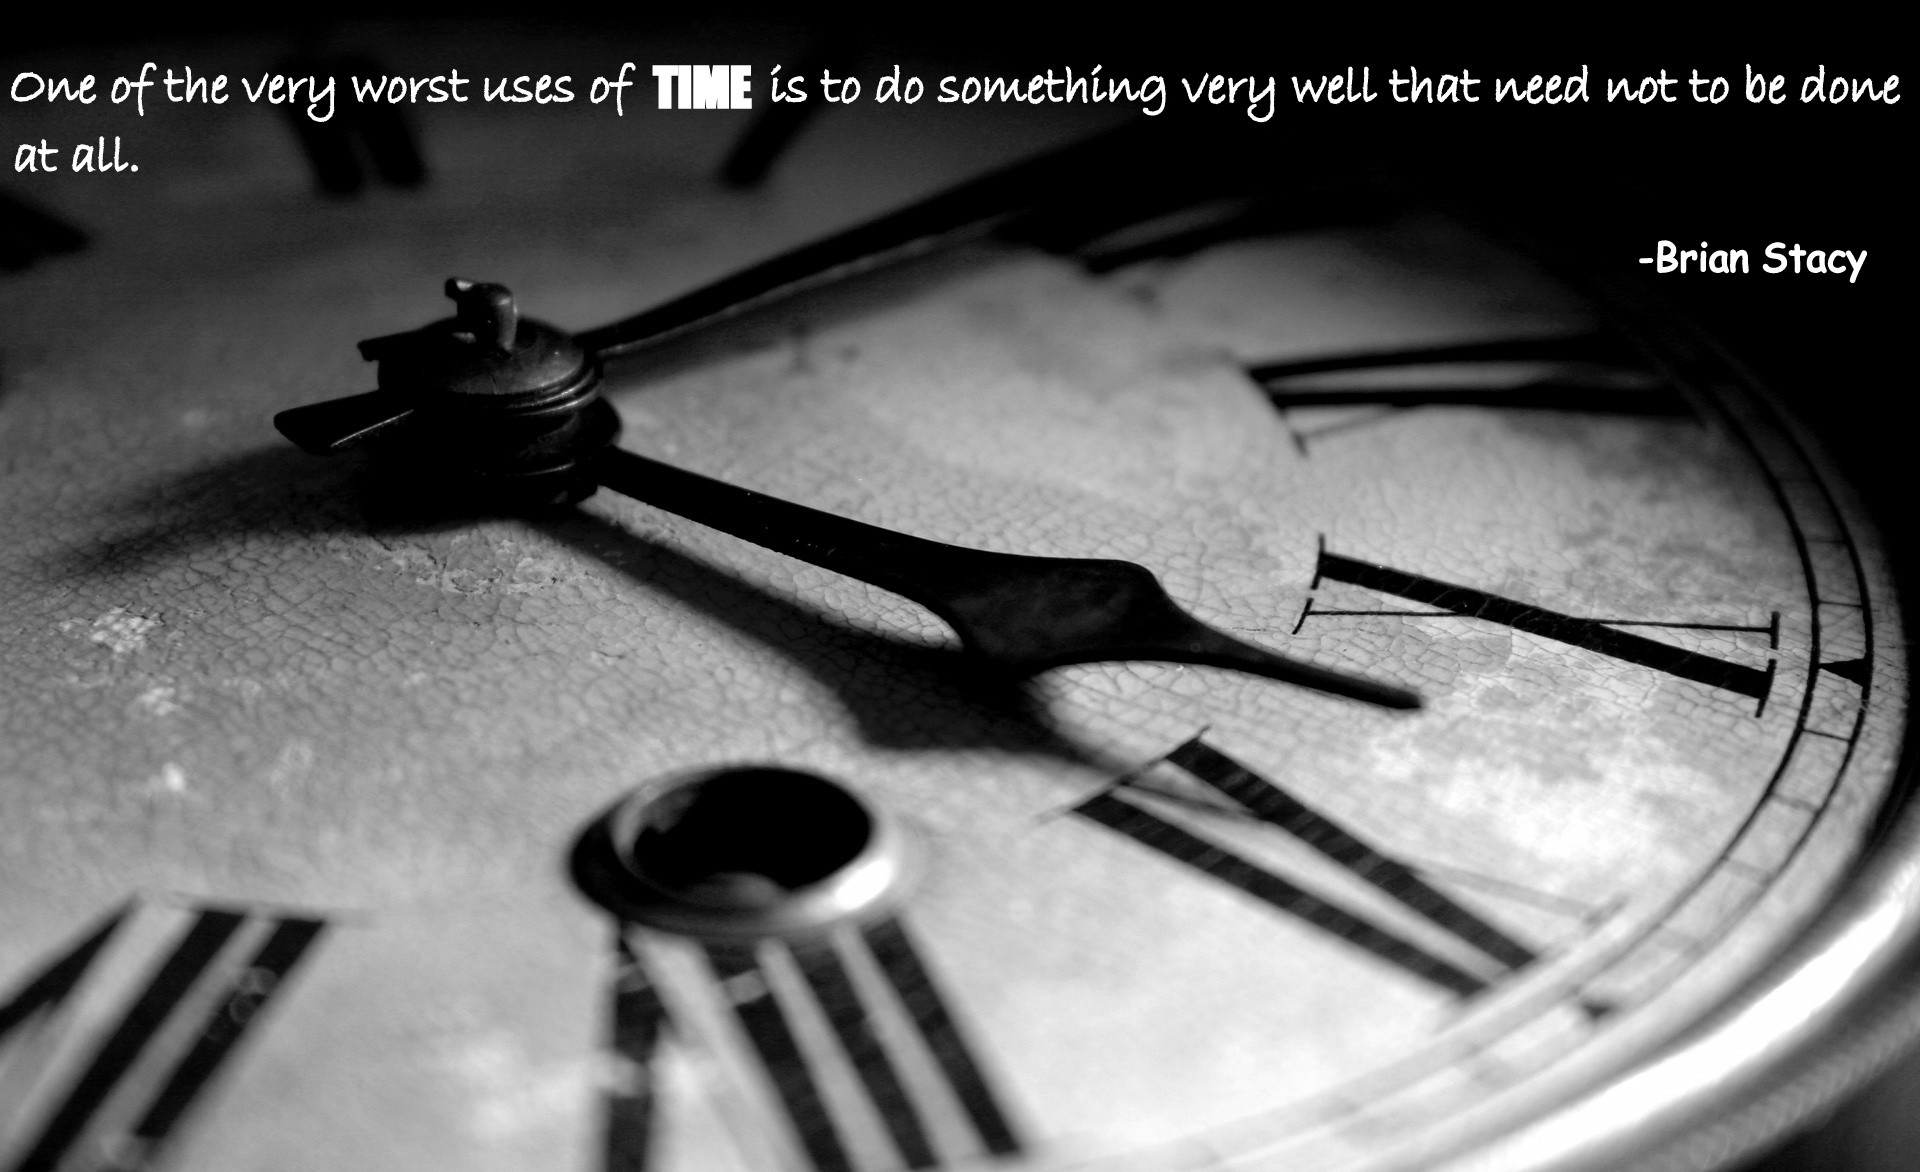 1920x1172 “One of the very worst uses of time is to do something very well that need  not to be done at all.” – Brian Stacy. “